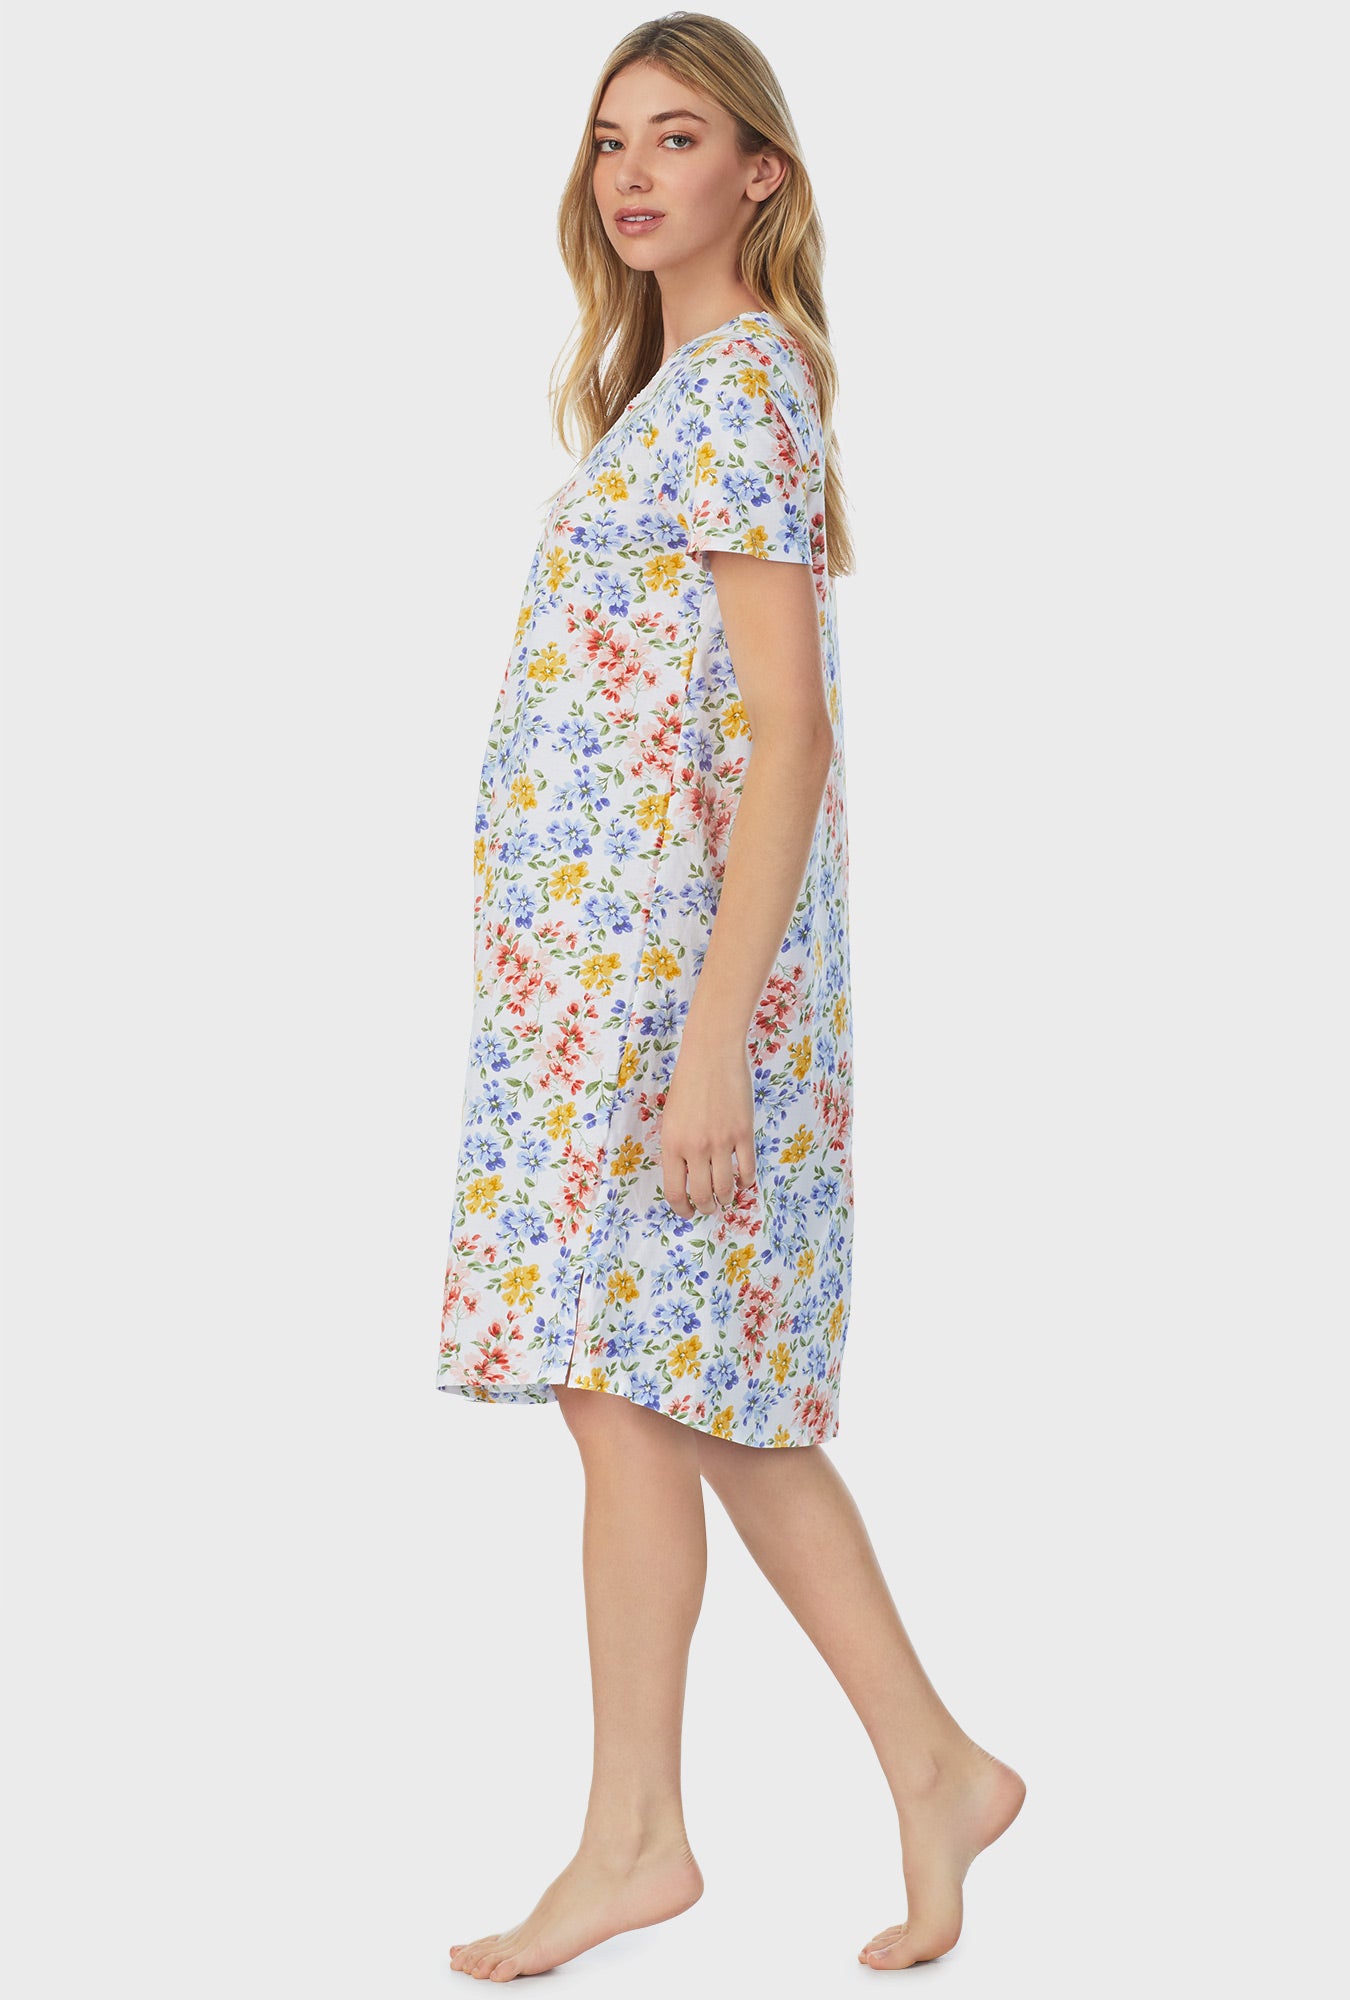 A lady wearing short sleeve waltz nightgown with multi floral print.